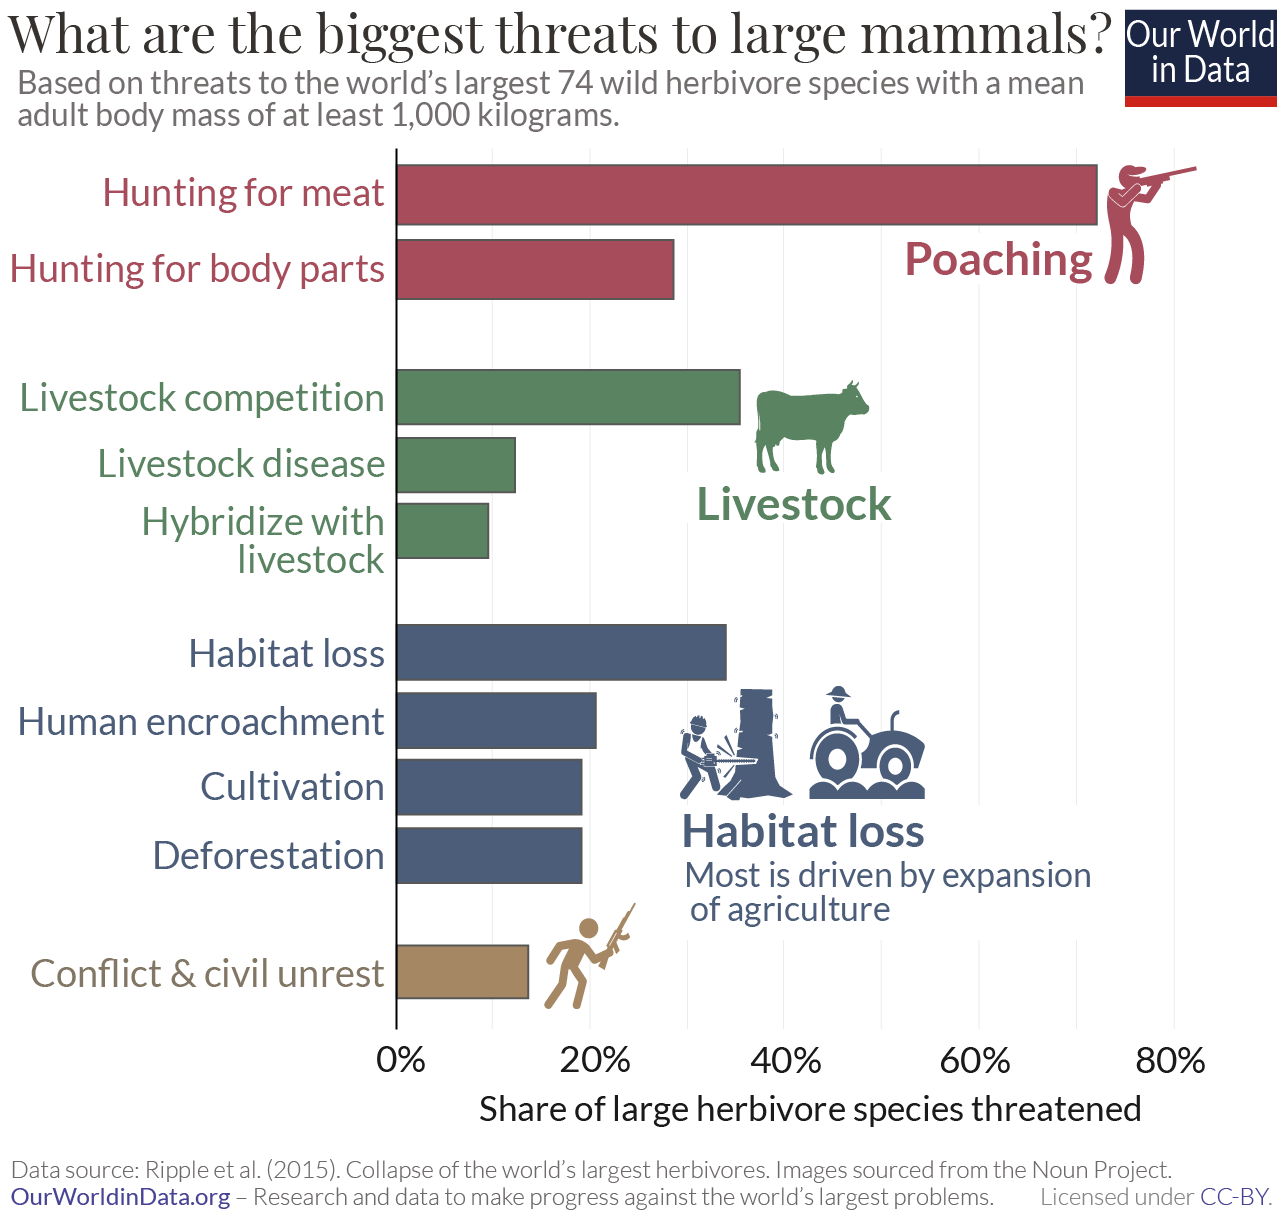 What are the largest threats to large mammals